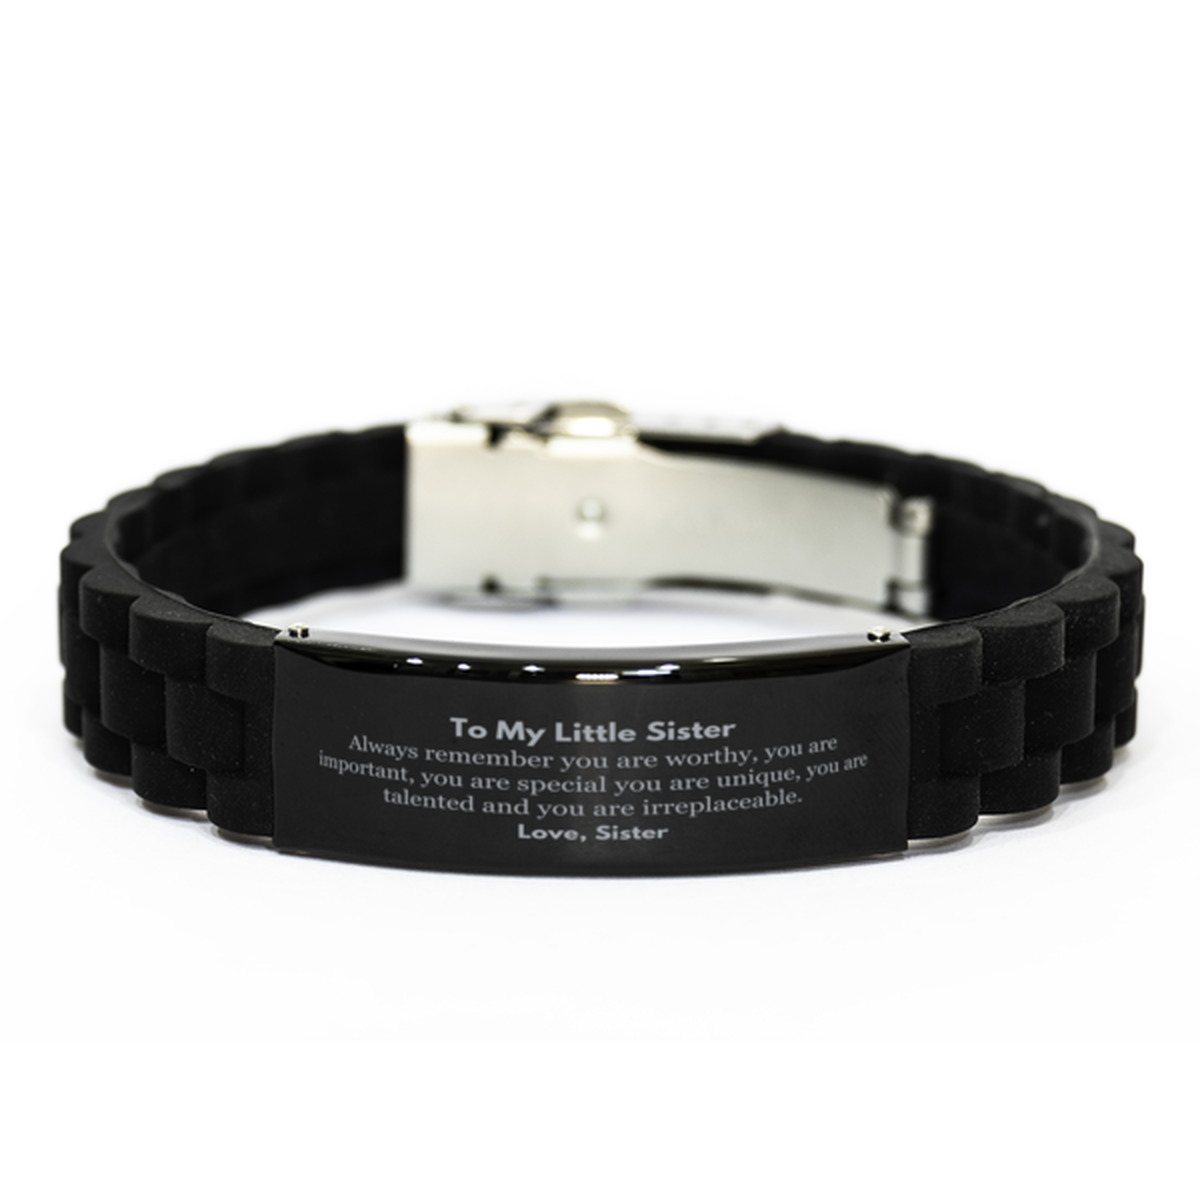 Little Sister Birthday Gifts from Sister, Inspirational Black Glidelock Clasp Bracelet for Little Sister Christmas Graduation Gifts for Little Sister Always remember you are worthy, you are important. Love, Sister